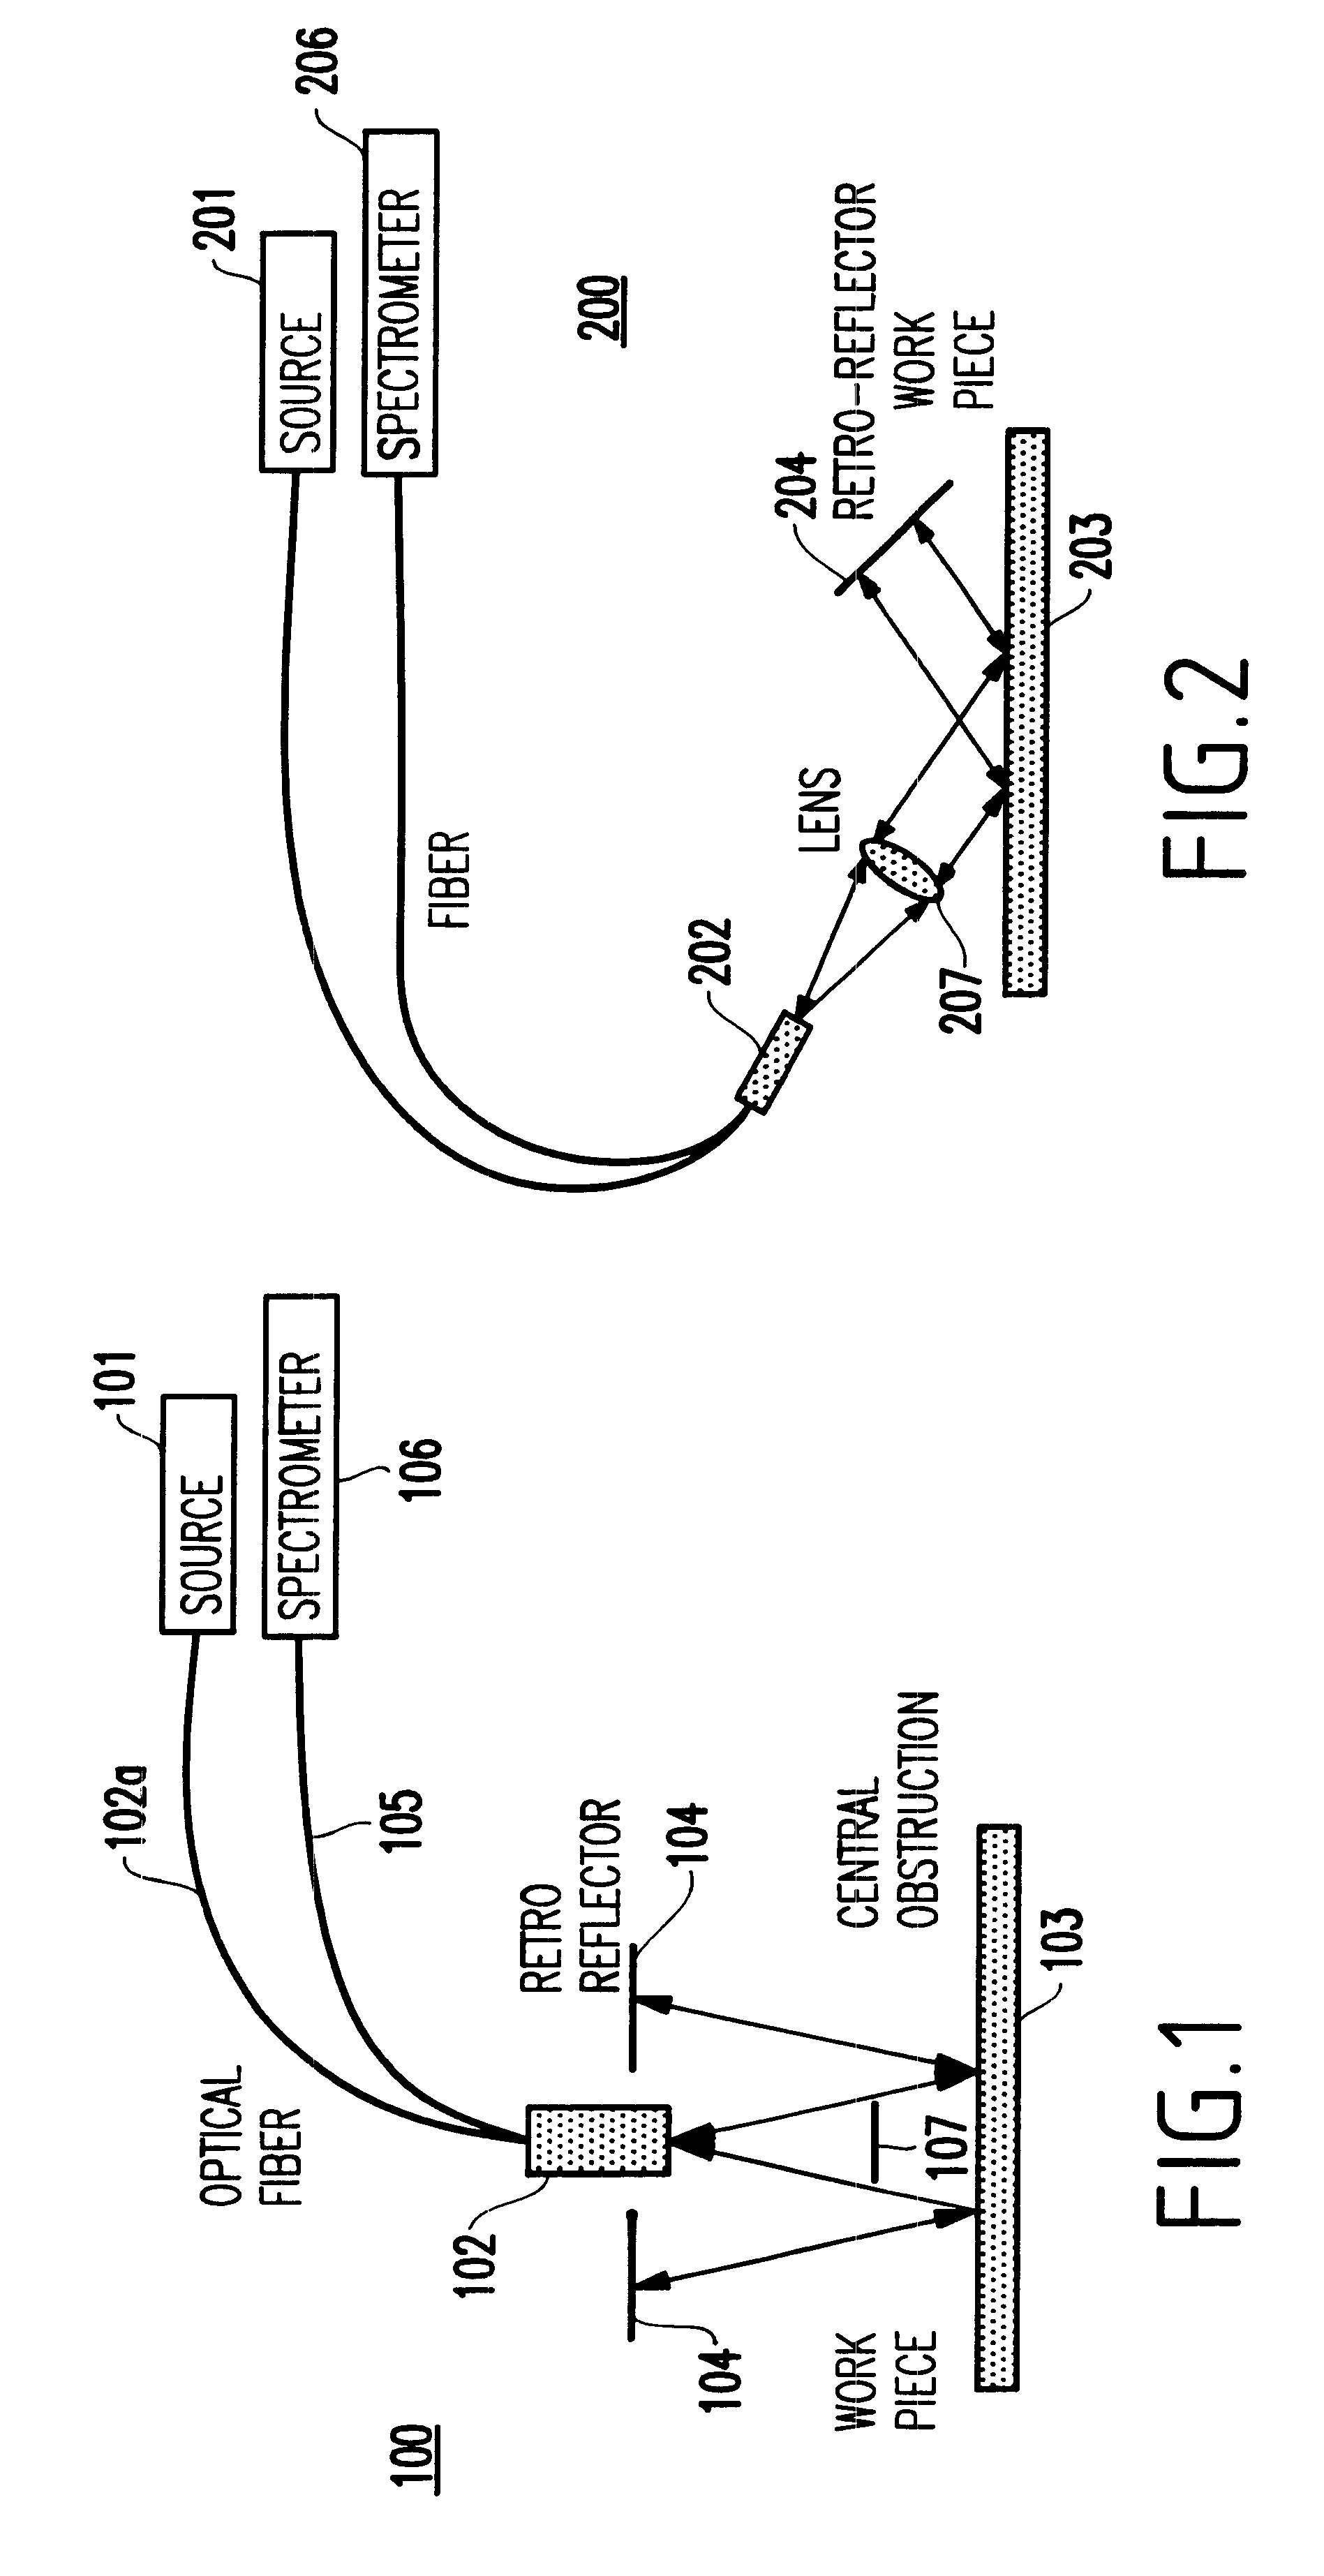 Support and alignment device for enabling chemical mechanical polishing rinse and film measurements